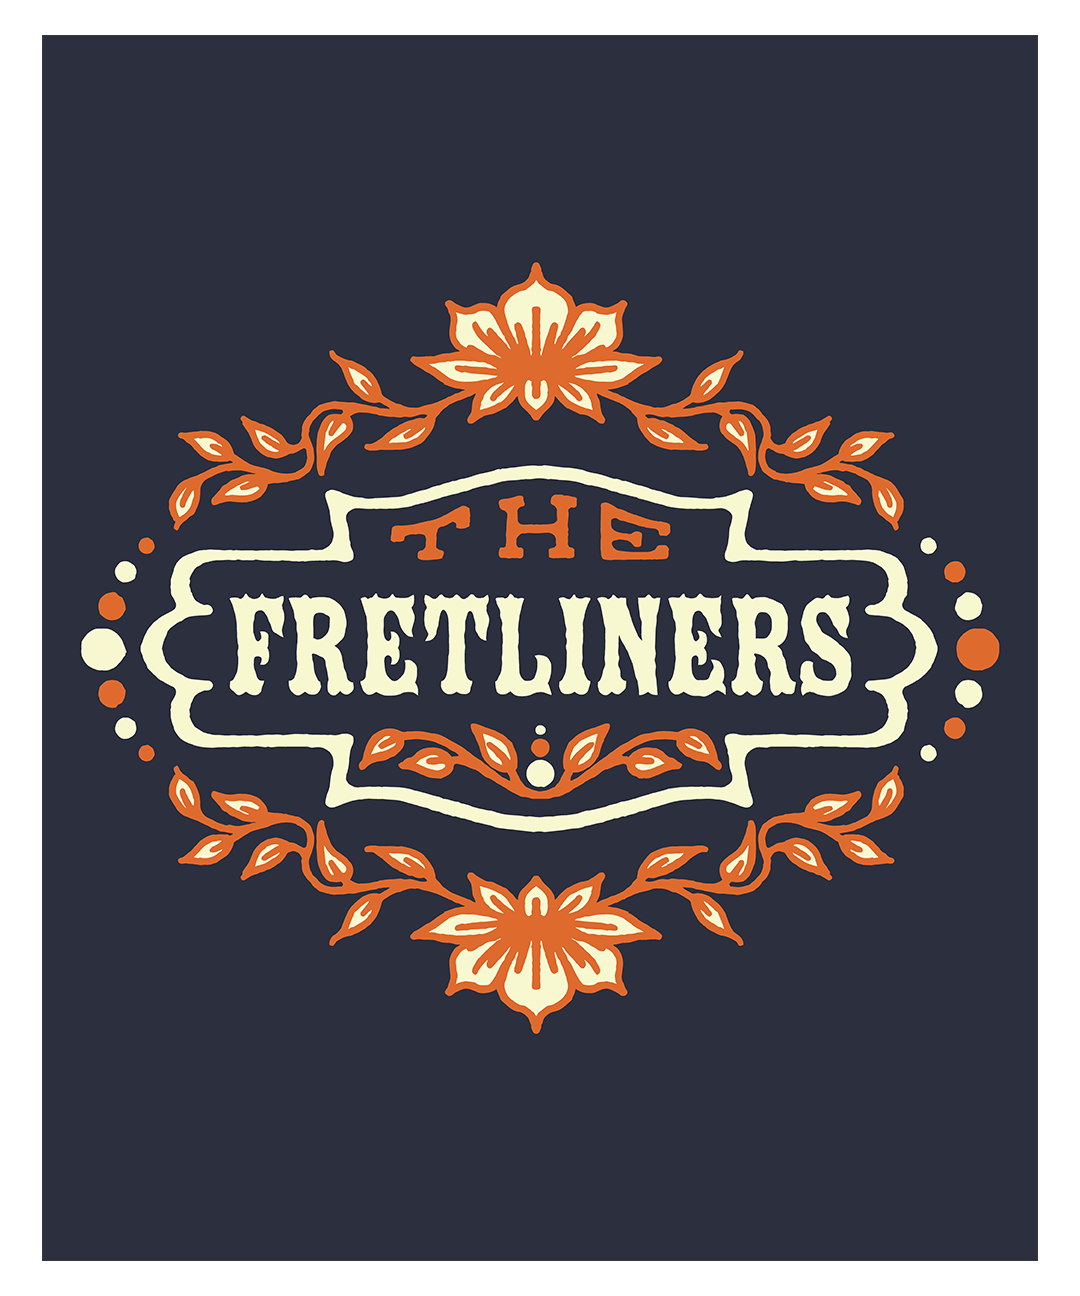 fretliners_forweb.png